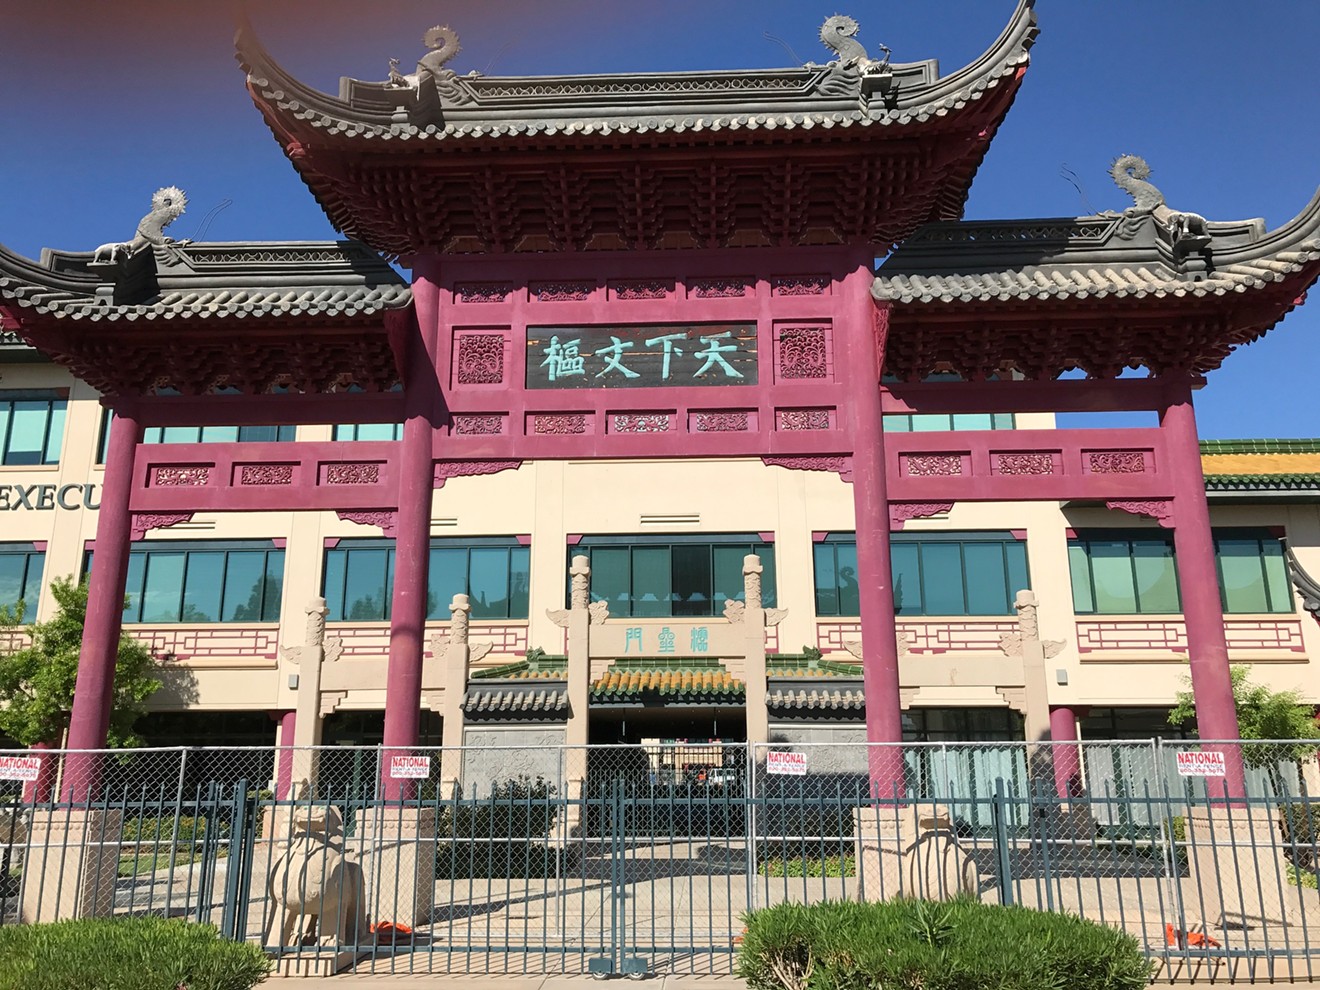 The former Chinese Cultural Center, which is now owned by 668 North.